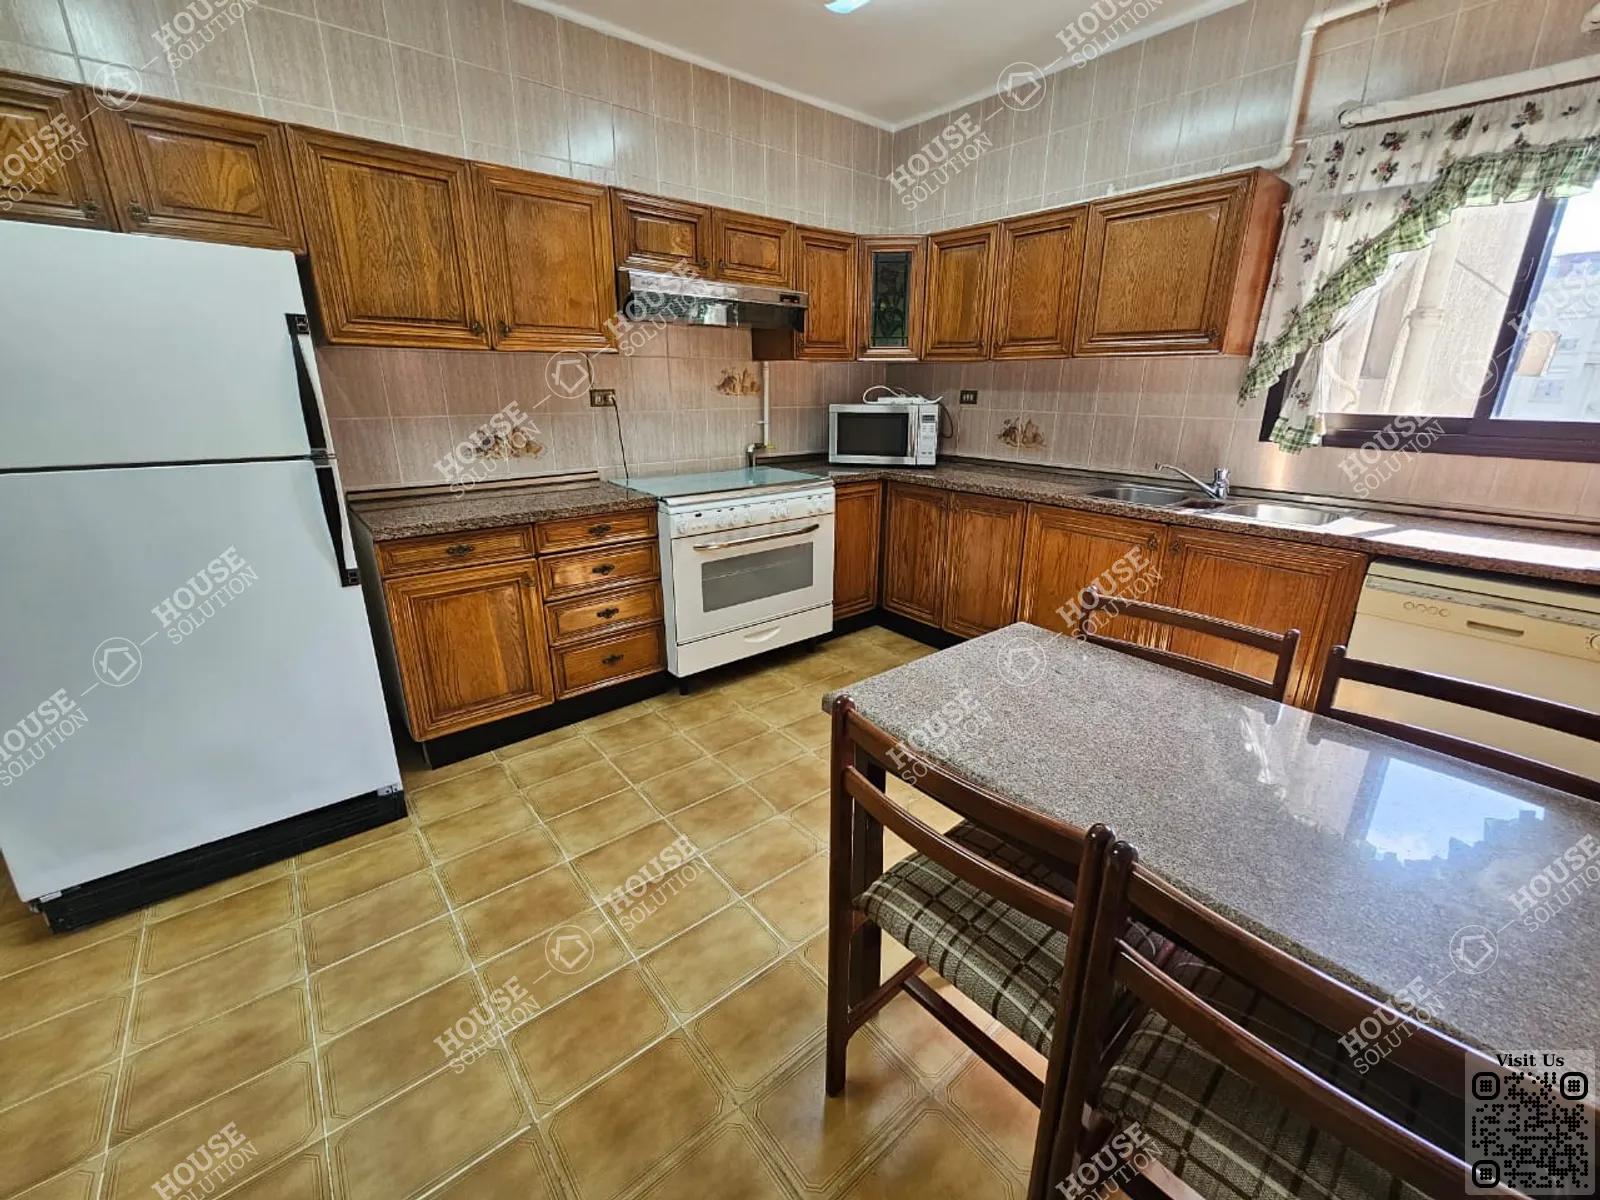 KITCHEN  @ Apartments For Rent In Maadi Maadi Sarayat Area: 220 m² consists of 4 Bedrooms 3 Bathrooms Furnished 5 stars #5825-2